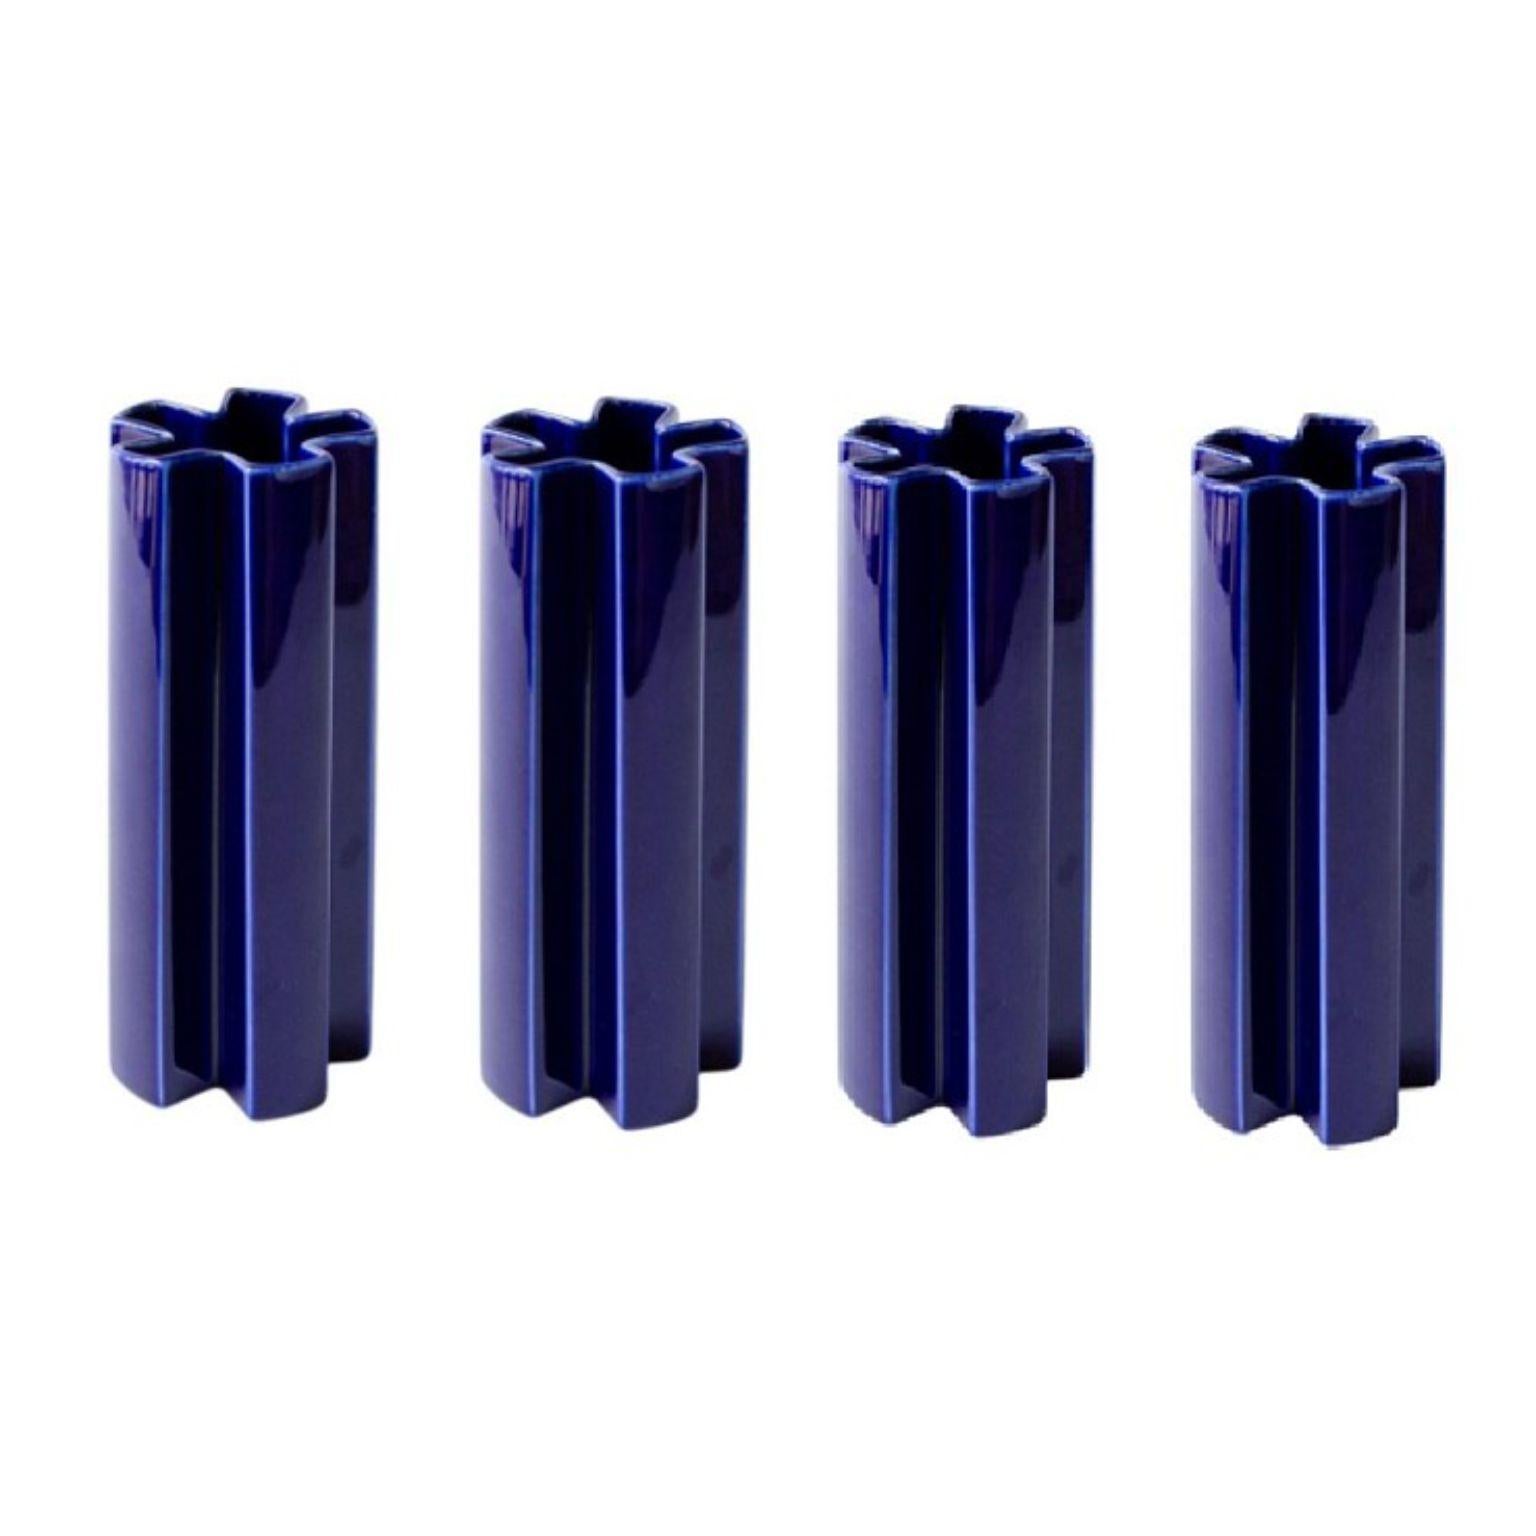 Set of 4 Medium Blue Ceramic KYO Star vases by Mazo Design
Dimensions: D 8 x H 19 cm 
Materials: glazed ceramic.

Both functional and sculptural, the new collection from mazo is very Scandinavian and Japanese at the same time. The series